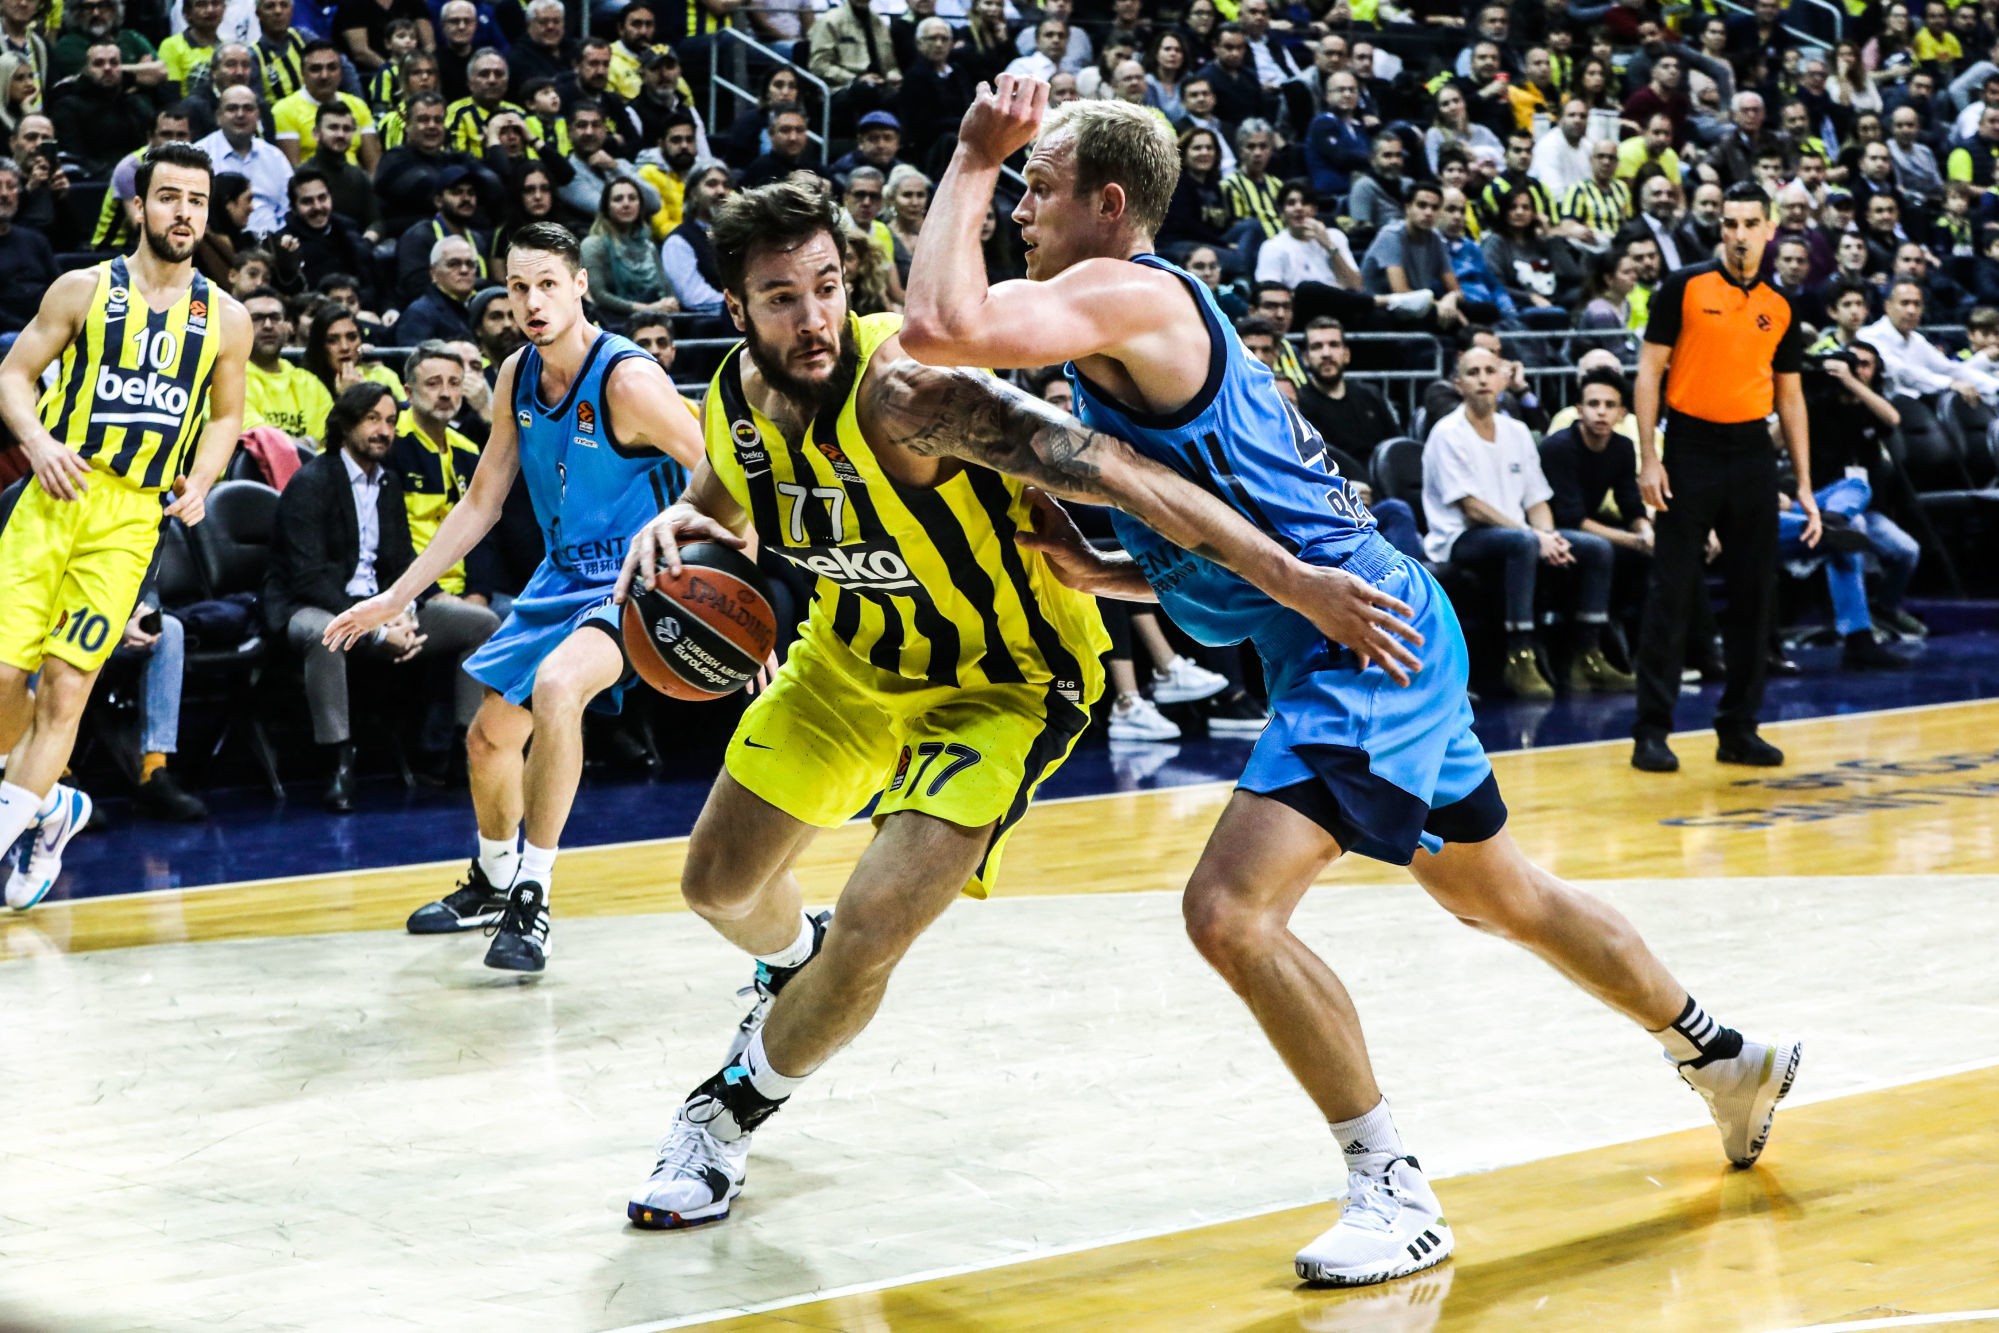 Joffrey Lauvergne #77 of Fenerbahce Beko Istanbul and  Luke Sikma #43 of Alba Berlin during the Turkish Airlines Euroleague match between Fenerbahce Beko Istanbul and Alba Berlin at Ulker Arena in Istanbul , Turkey on December 06, 2019. 
Photo by Icon Sport - Joffrey LAUVERGNE - Luke SIKMA